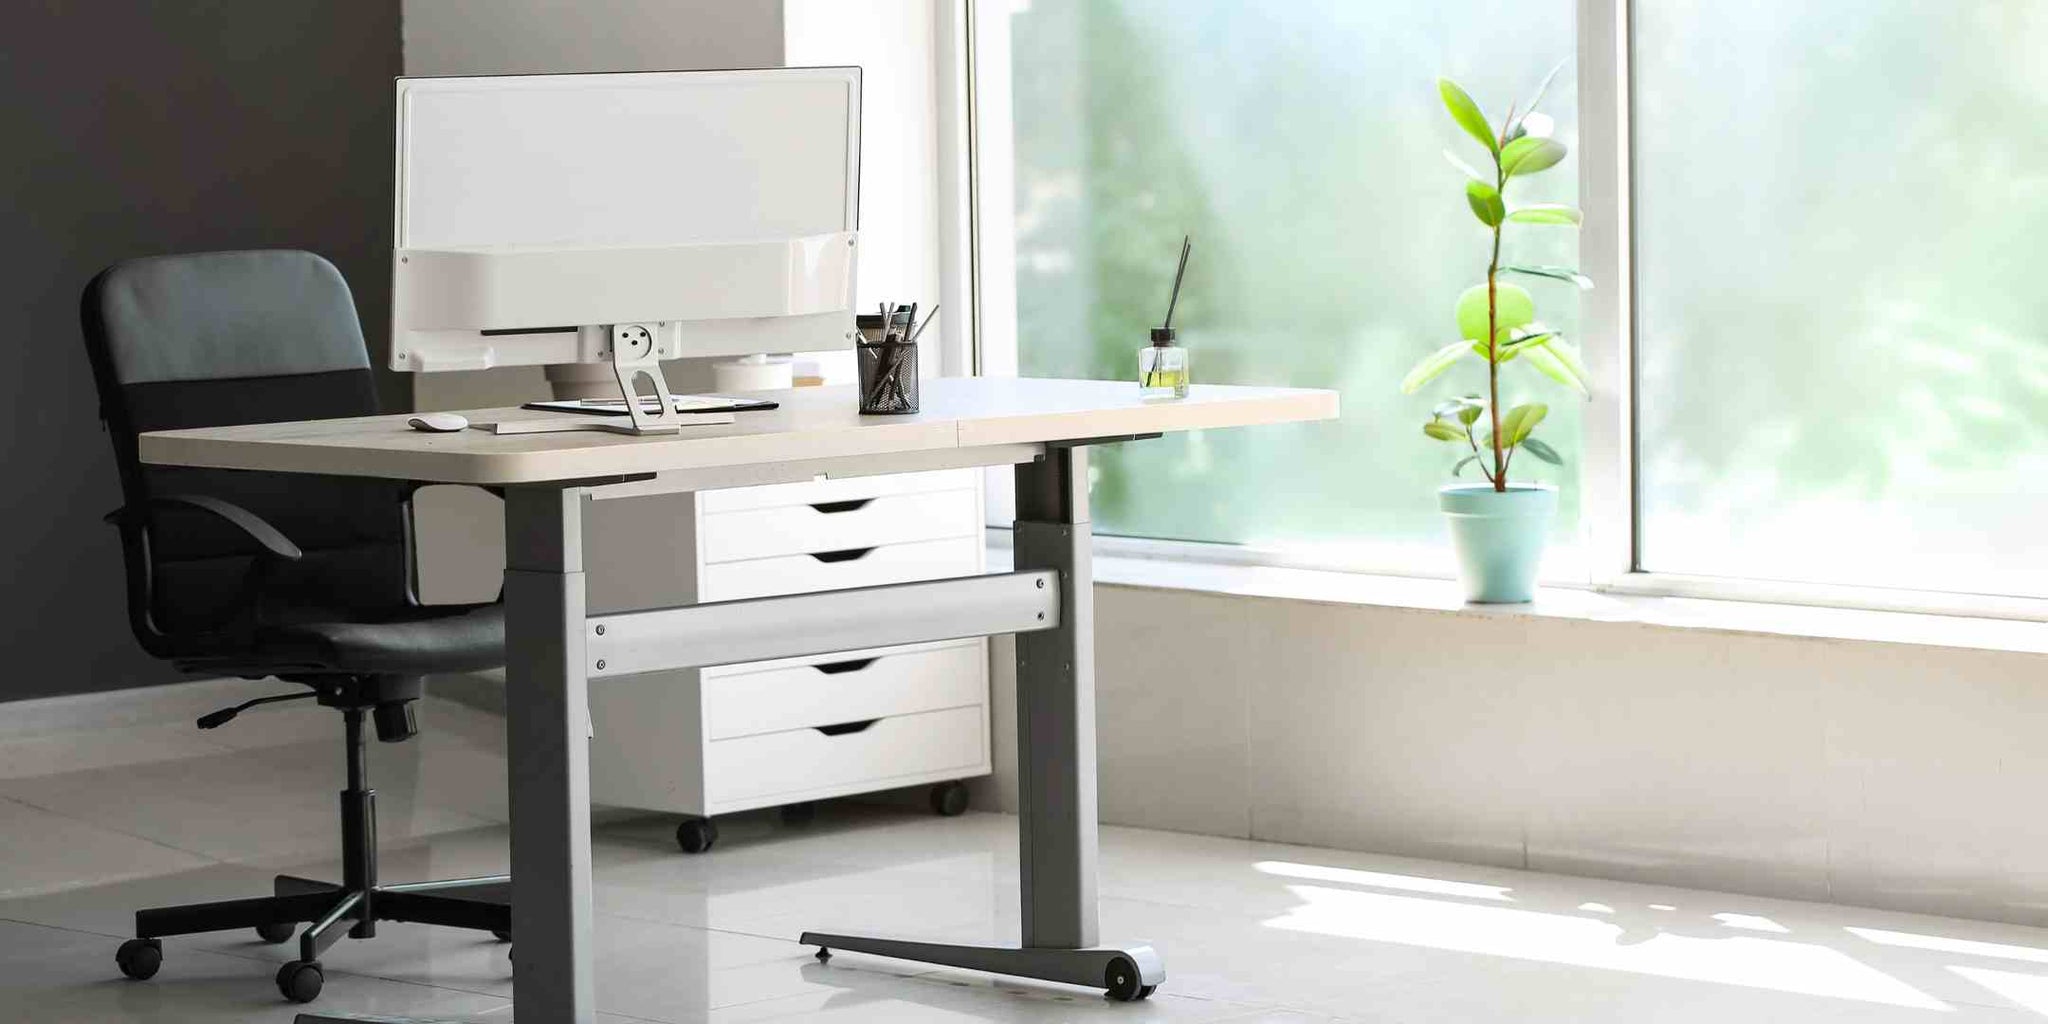 What is Ergonomic Design, and How Does it Apply to Computer Tables?